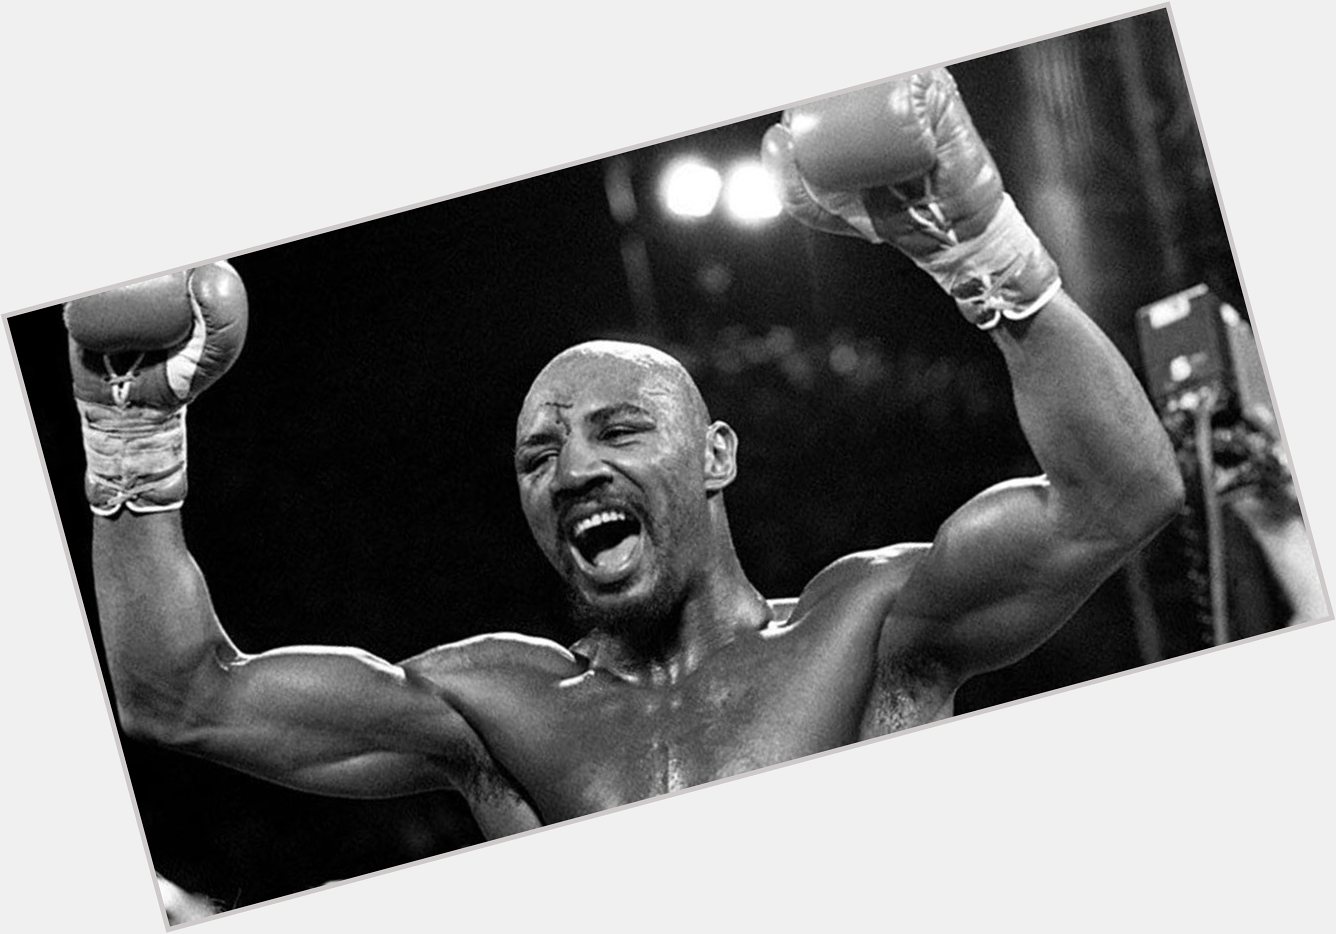 Happy bday to Marvelous Marvin Hagler, the greatest Middleweight of all time. 